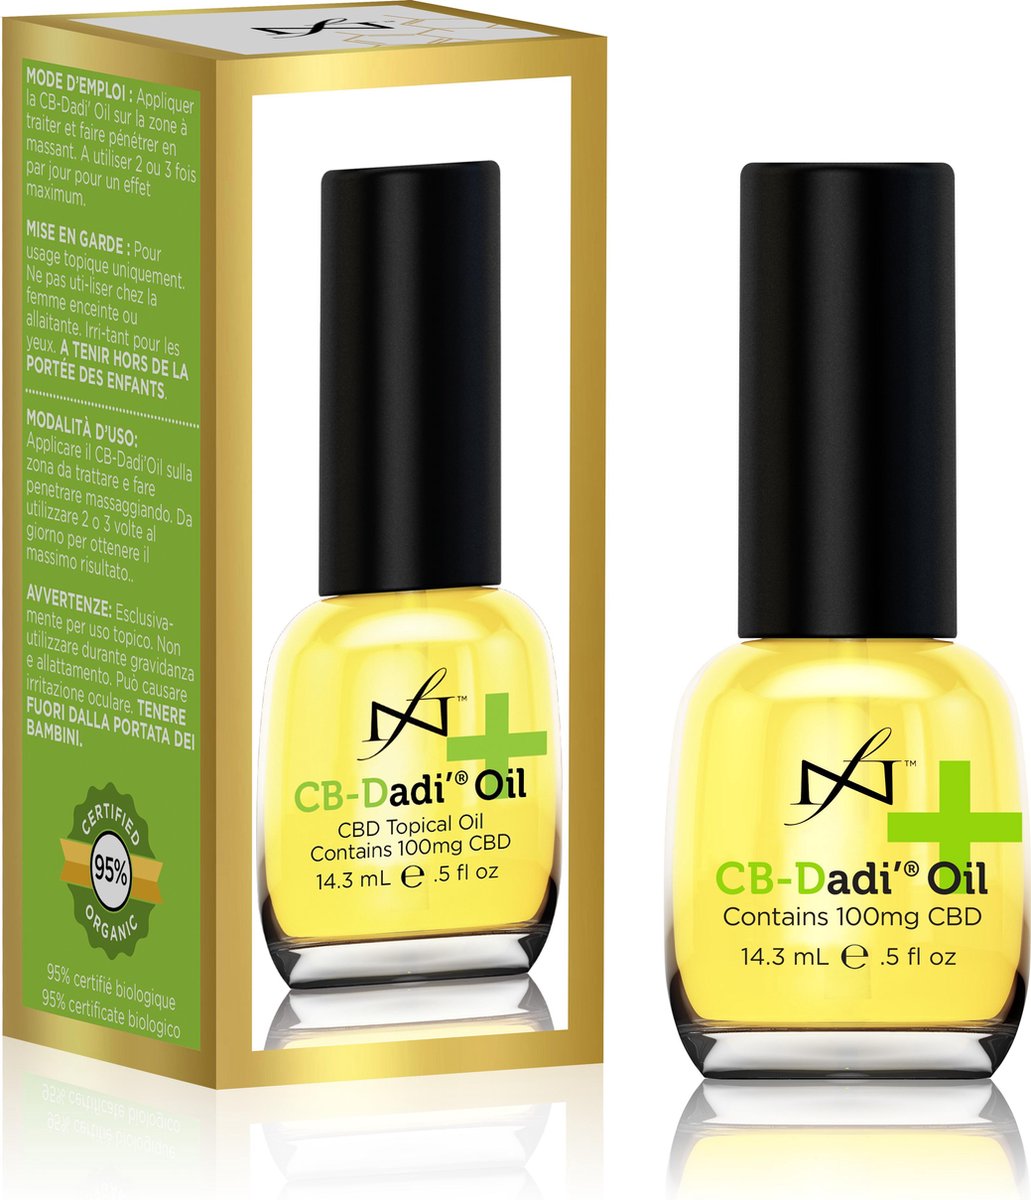 Famous Names - CB Dadi'oil Nagelriemolie - 14,3 ml